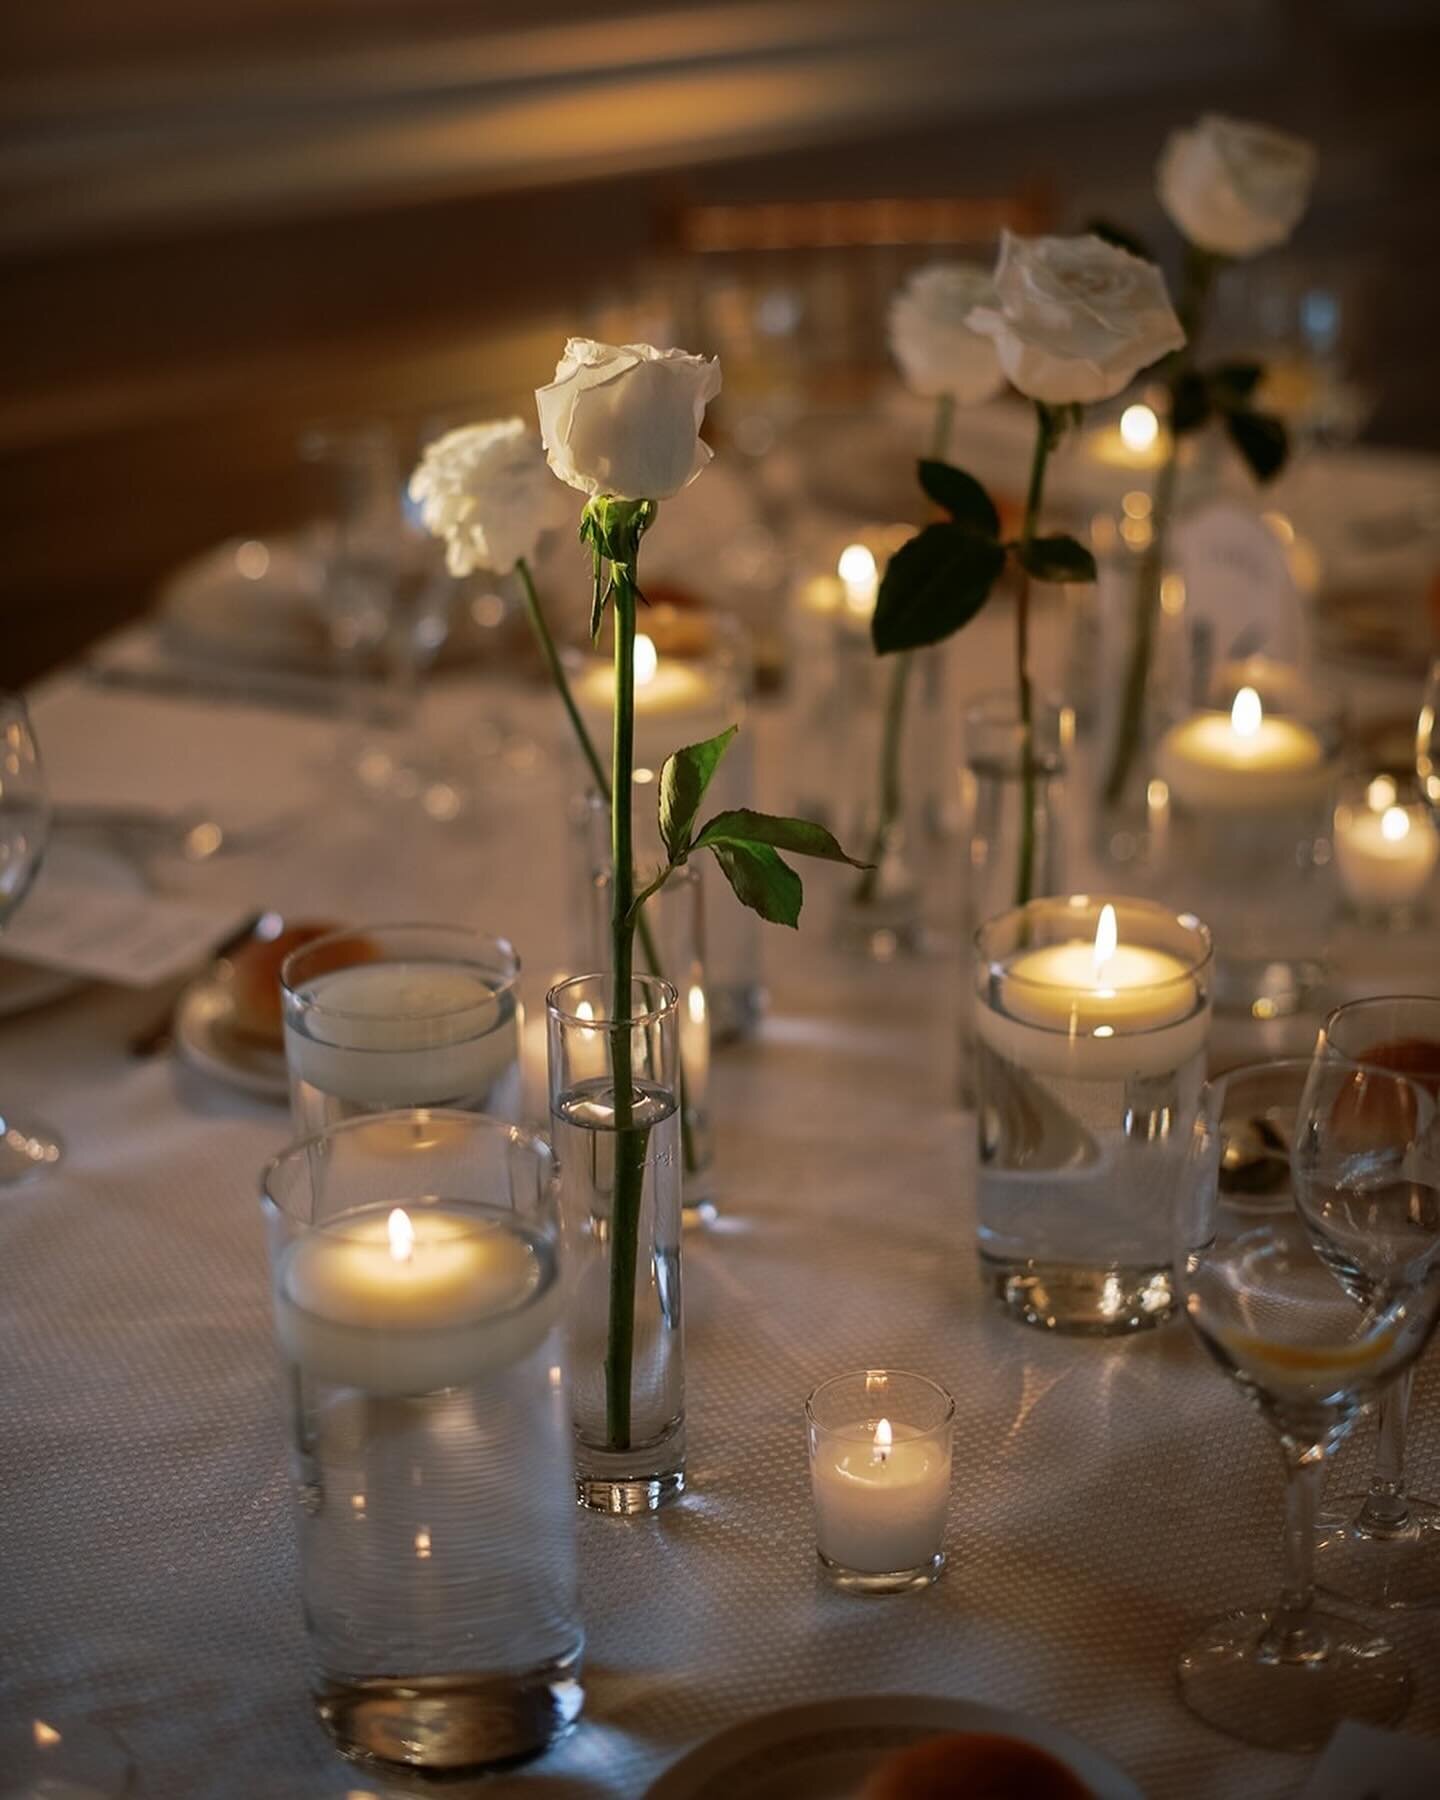 The most dreamy details with dainty florals and glowing candlelight.